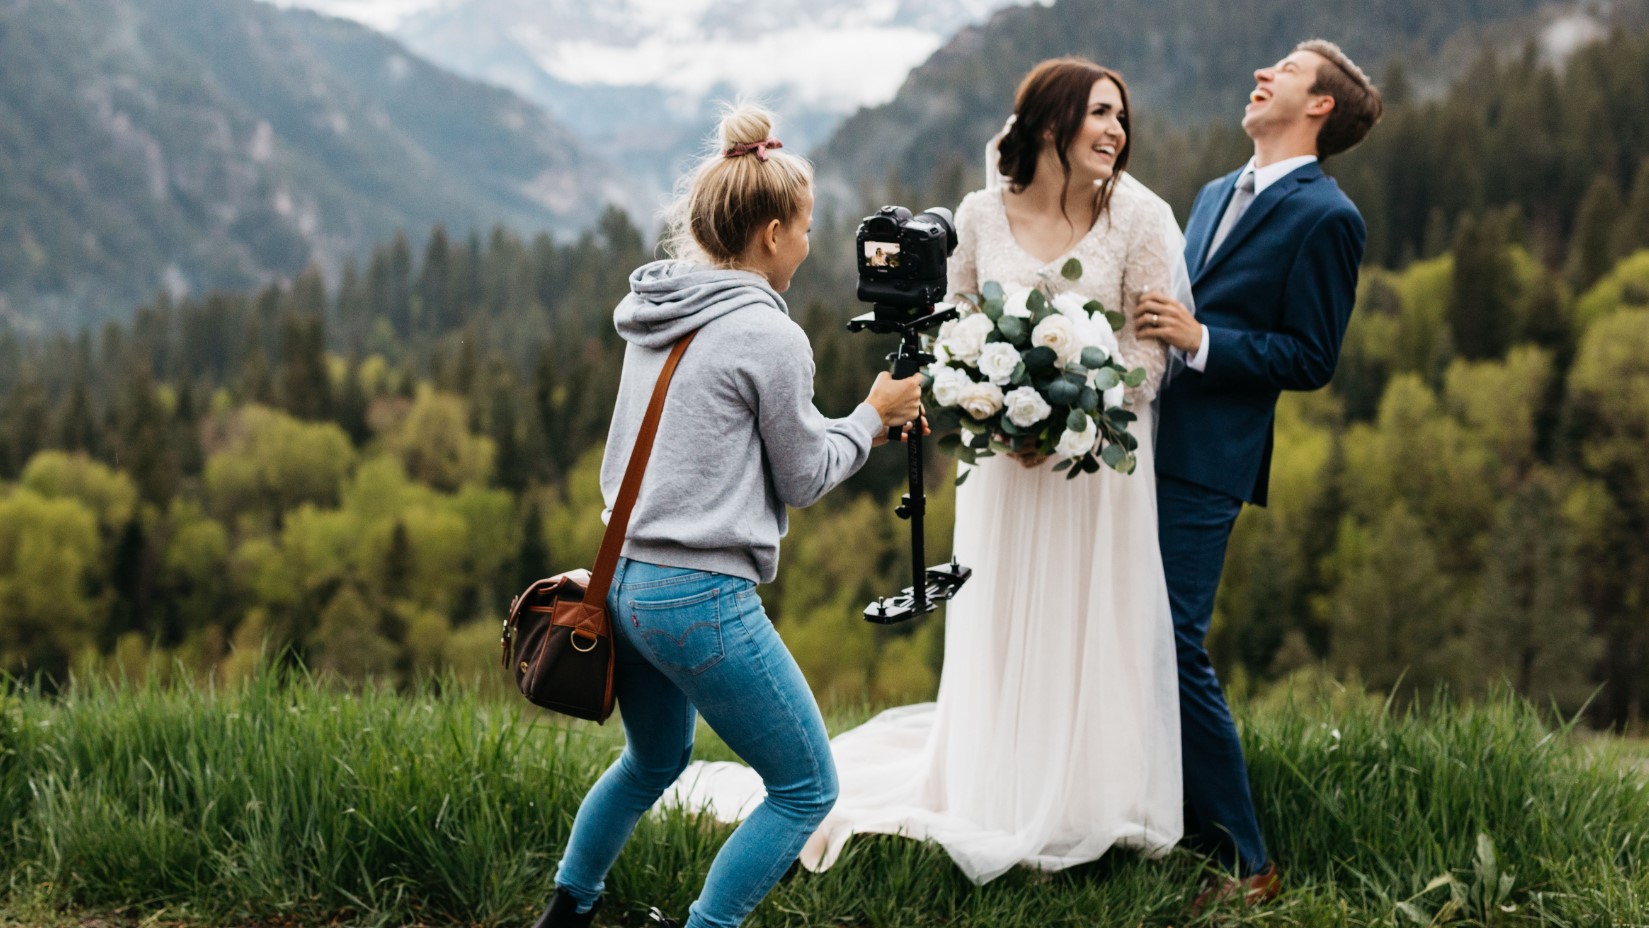 The Latest Trends in Wedding Videography Equipment